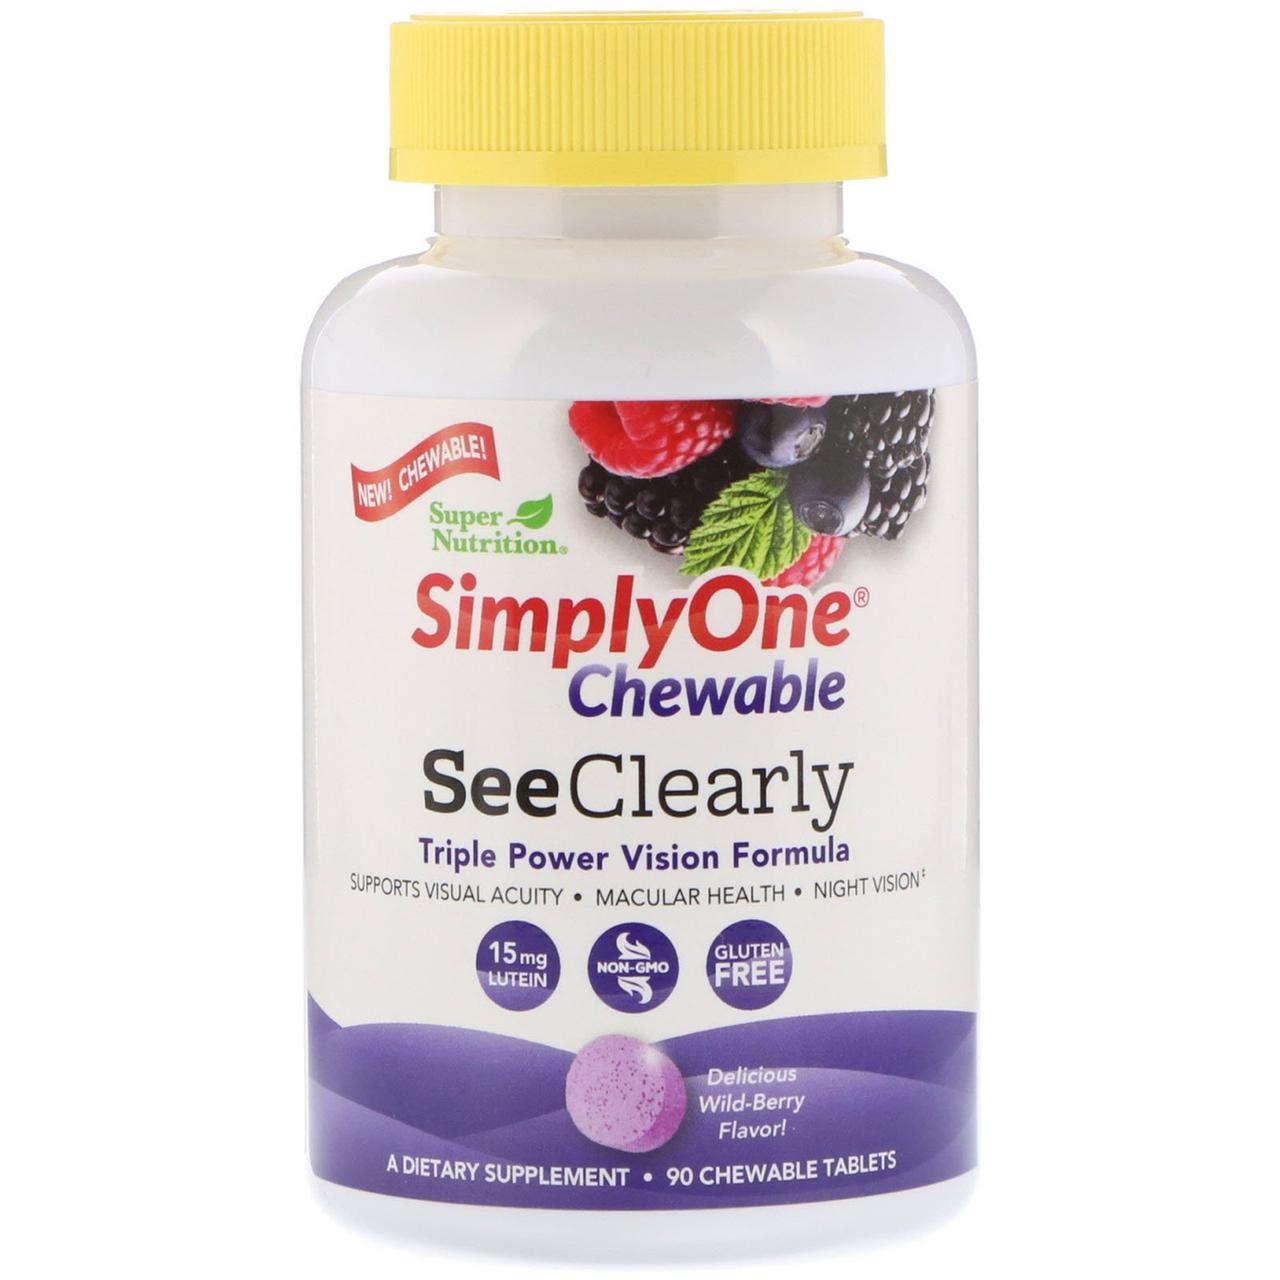 Super Nutrition, SimplyOne, See Clearly Triple Power Vision Formula, Wild-Berry Flavor, 90 Chewable Tablets